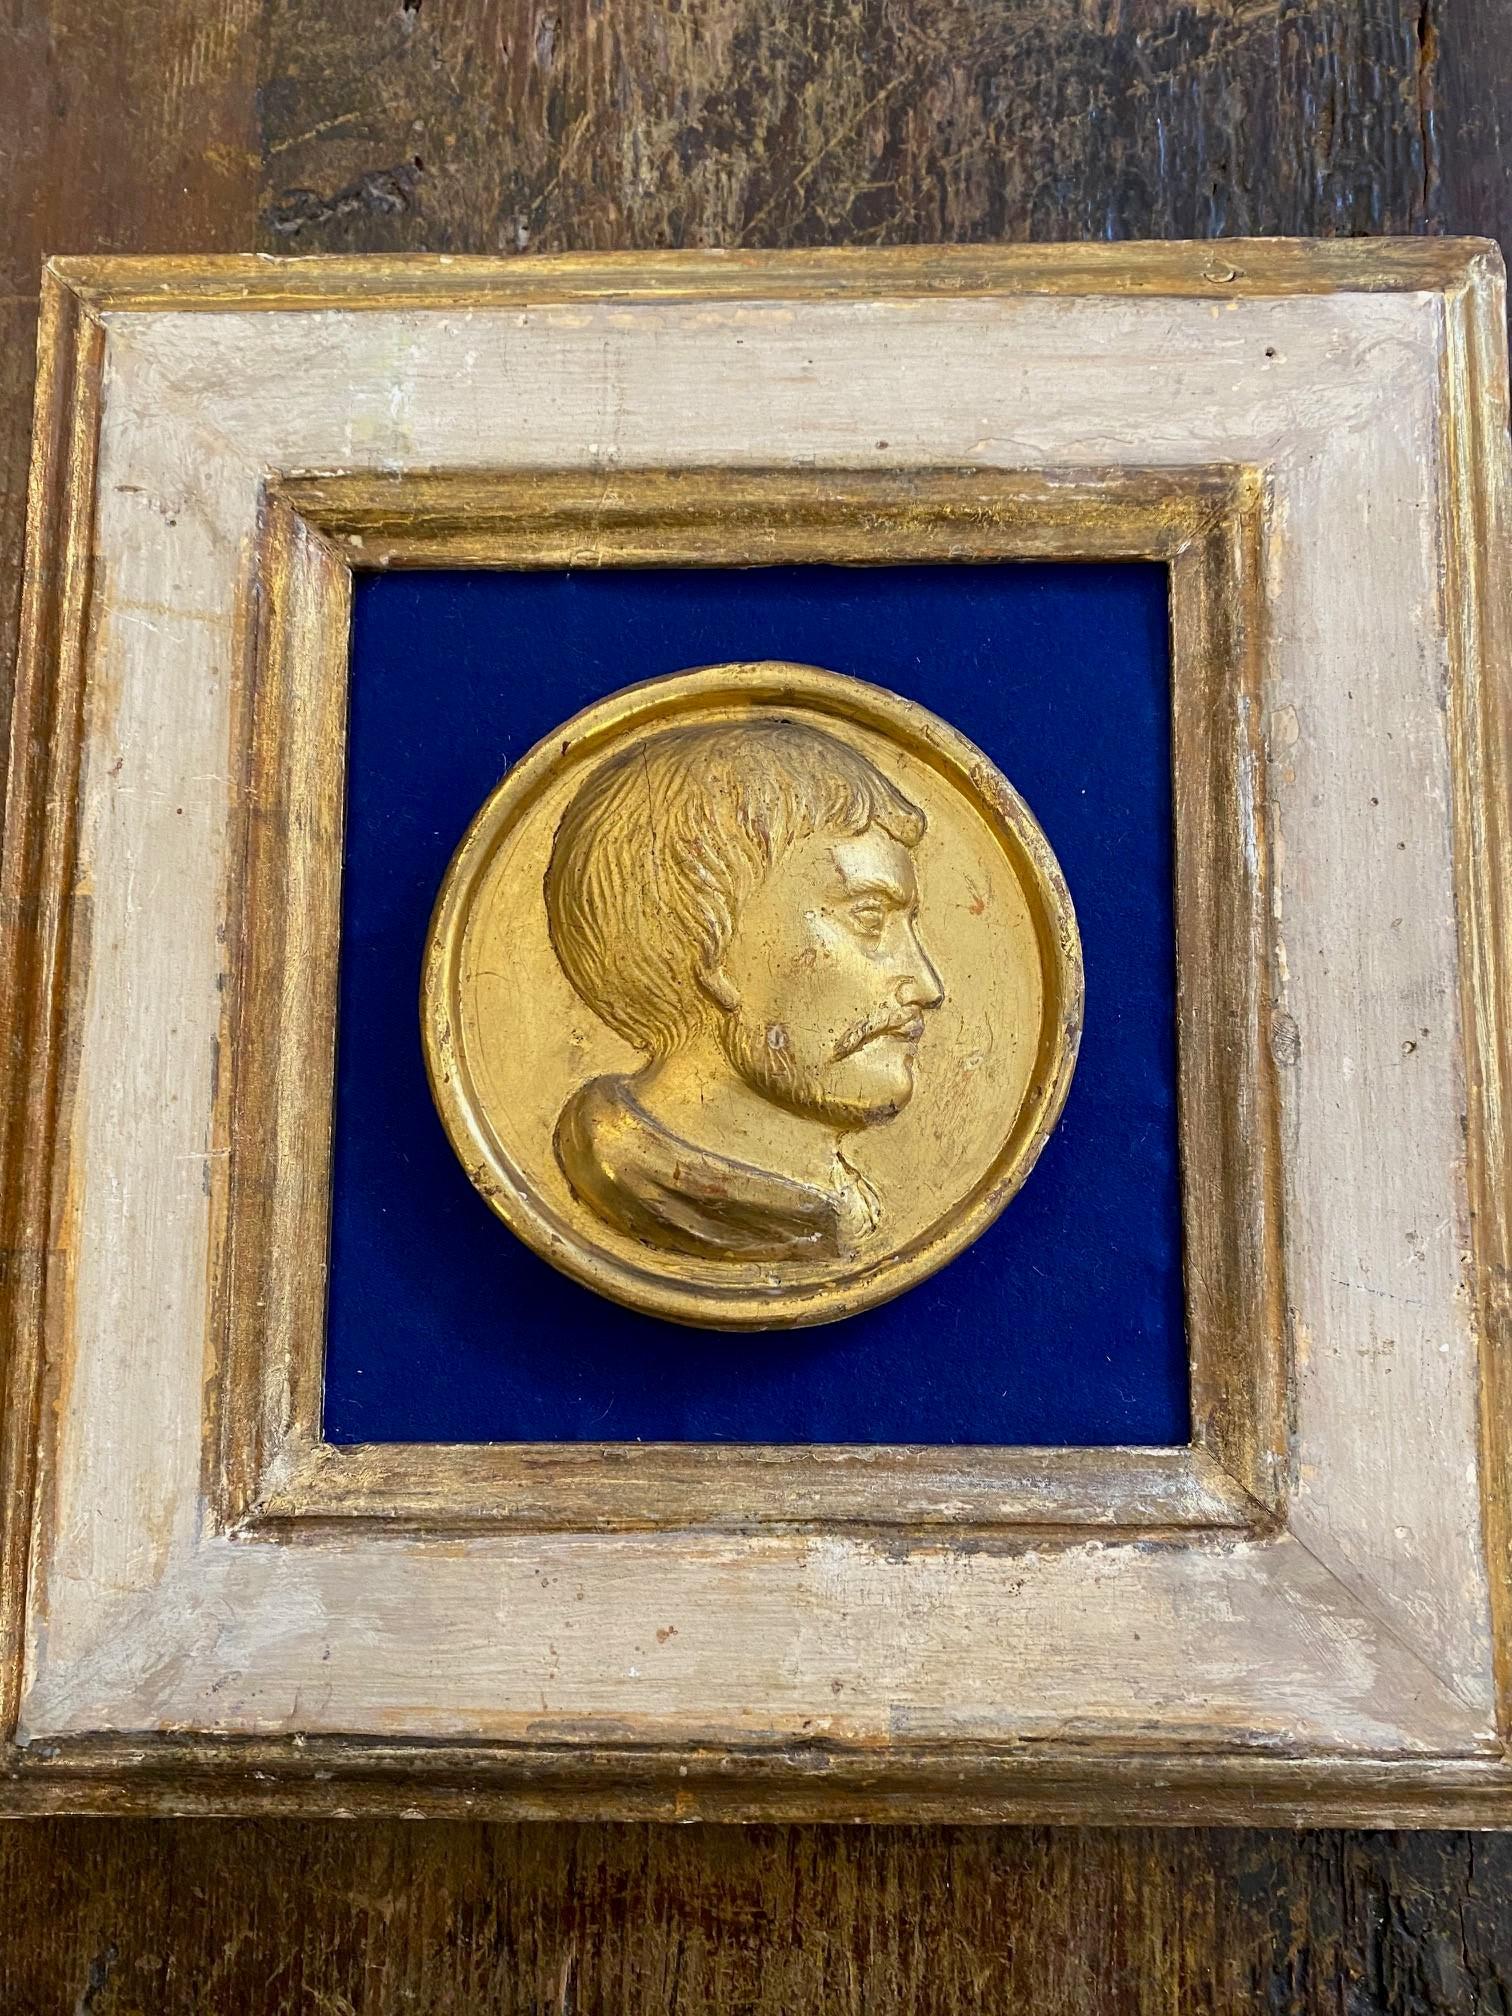 19th Century, Gold Background Picture with Male Profile Medallion. Particular and exclusive piece of furniture. Period '800 hand-crafted in Southern Italy.